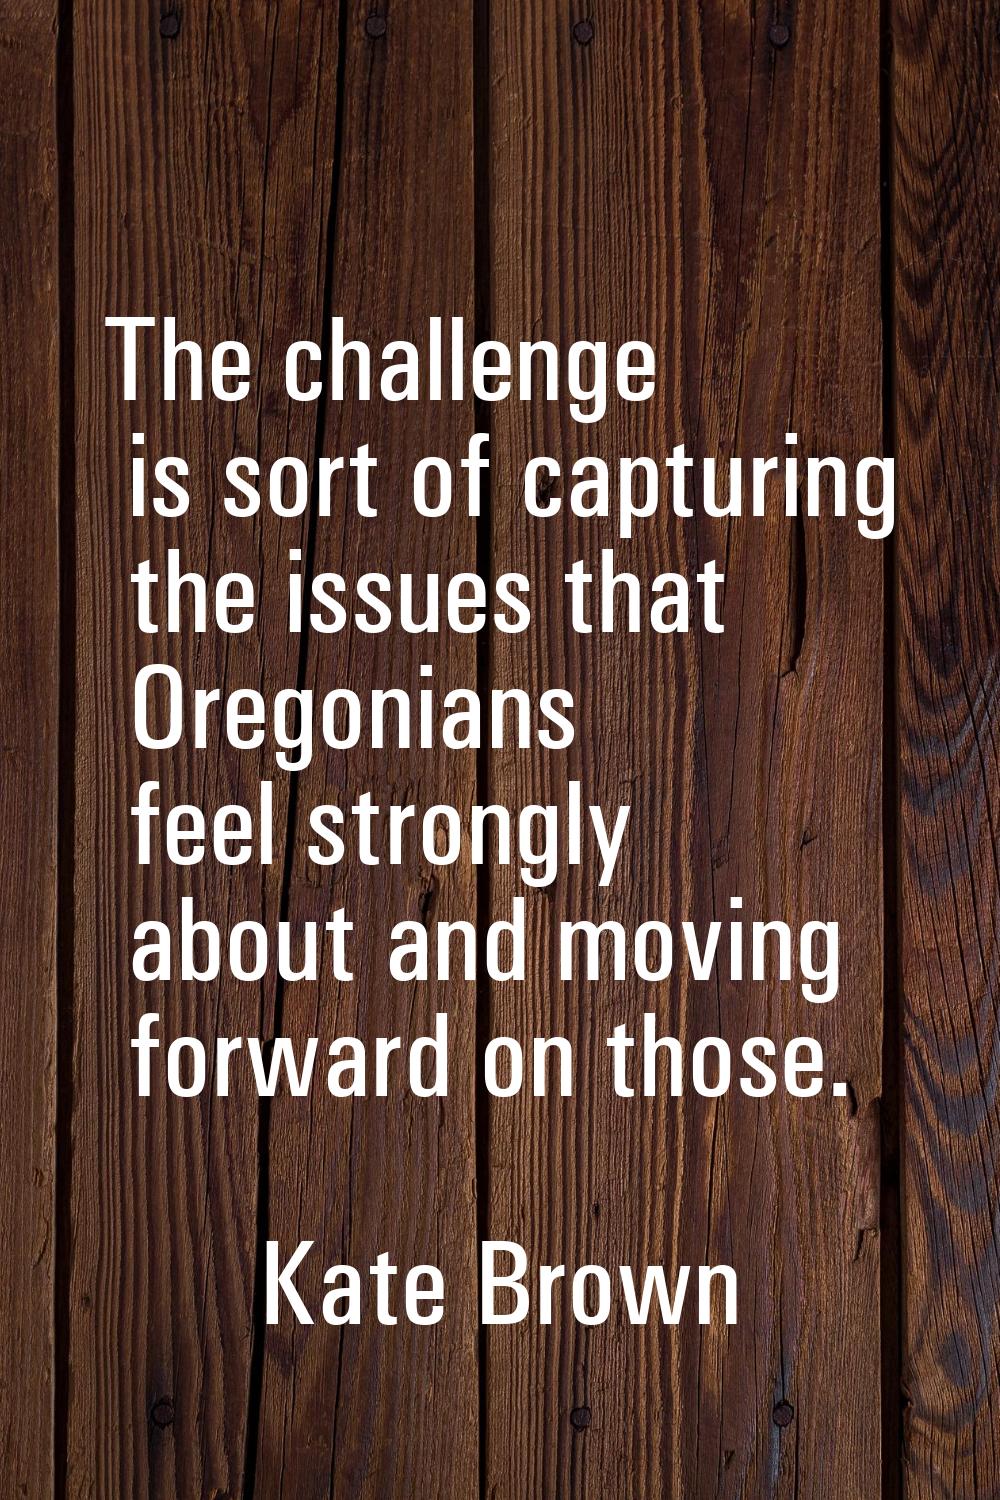 The challenge is sort of capturing the issues that Oregonians feel strongly about and moving forwar